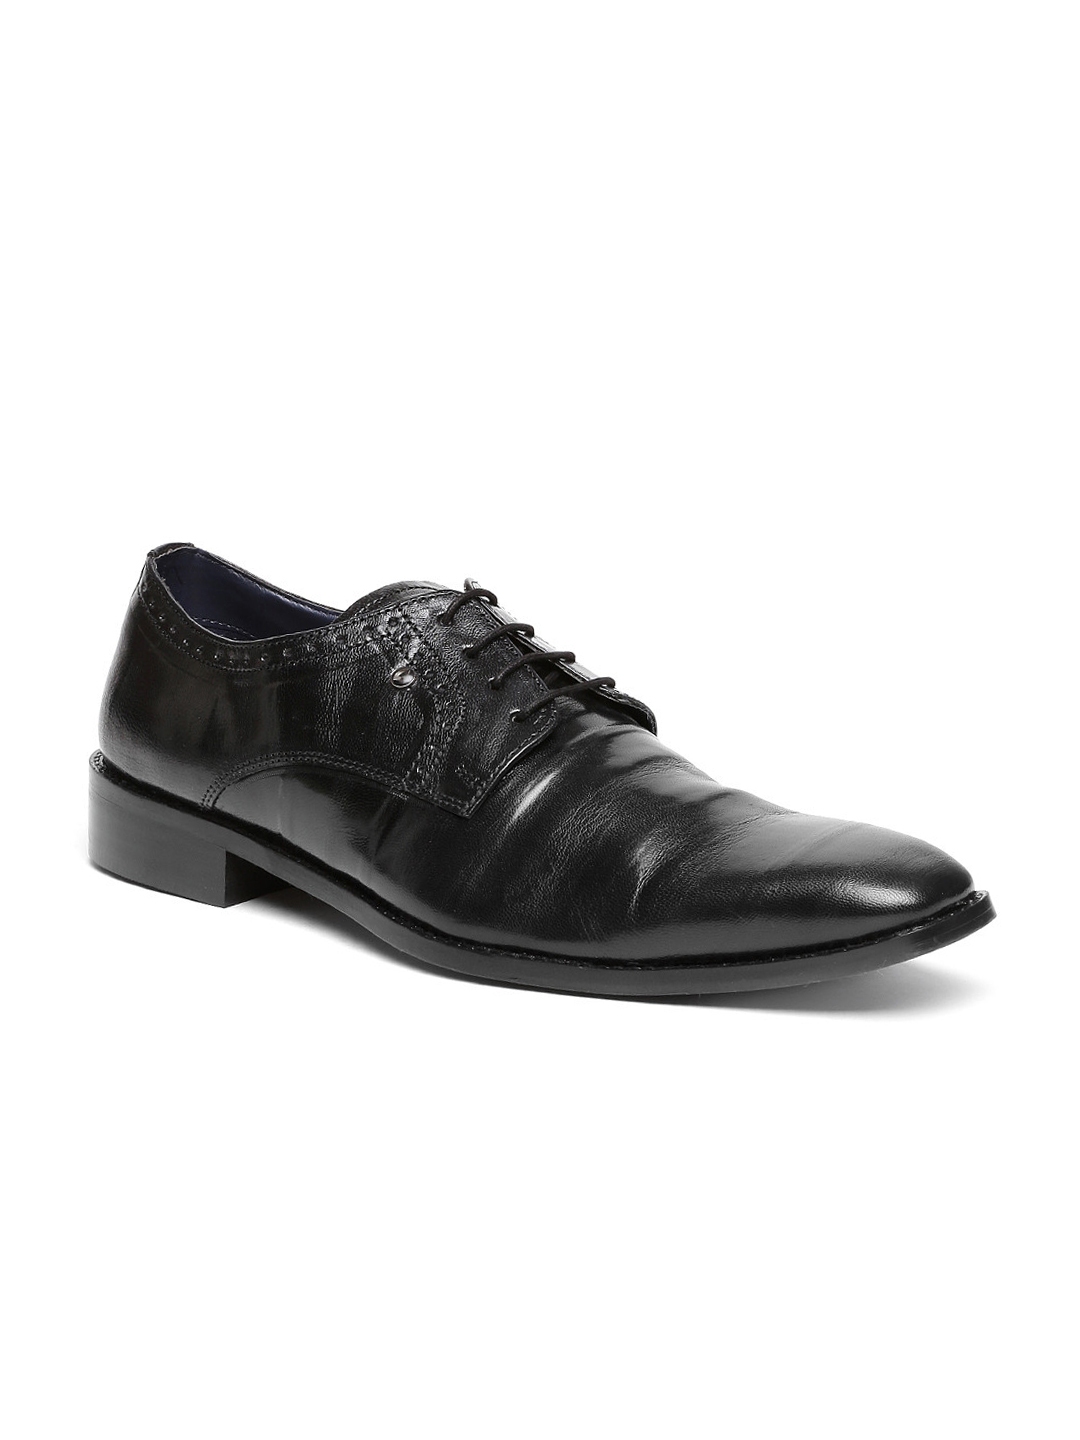 Buy INVICTUS Men Black Leather Derby Formal Shoes - Formal Shoes for ...